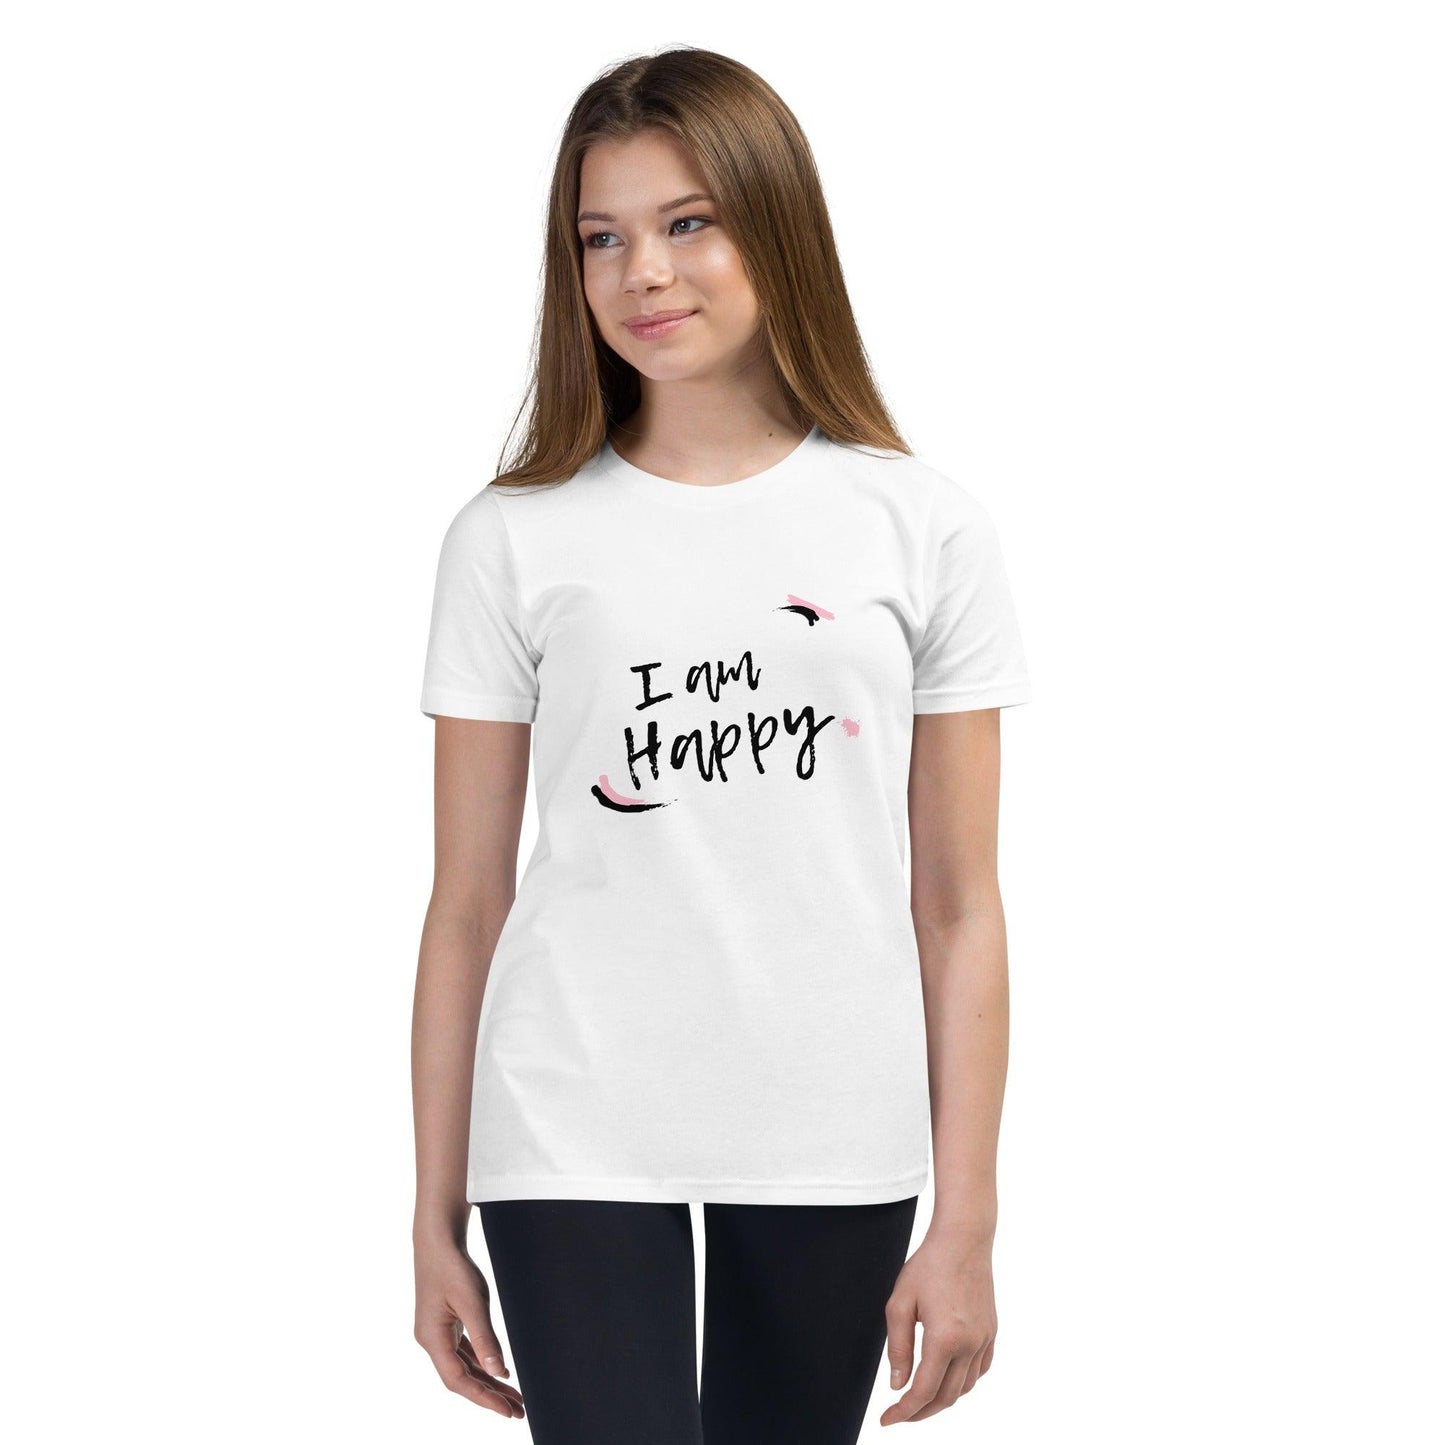 I Am Happy | Youth Short Sleeve T-Shirt | Youth Positive Affirmation T-Shirt - Affirm Effect